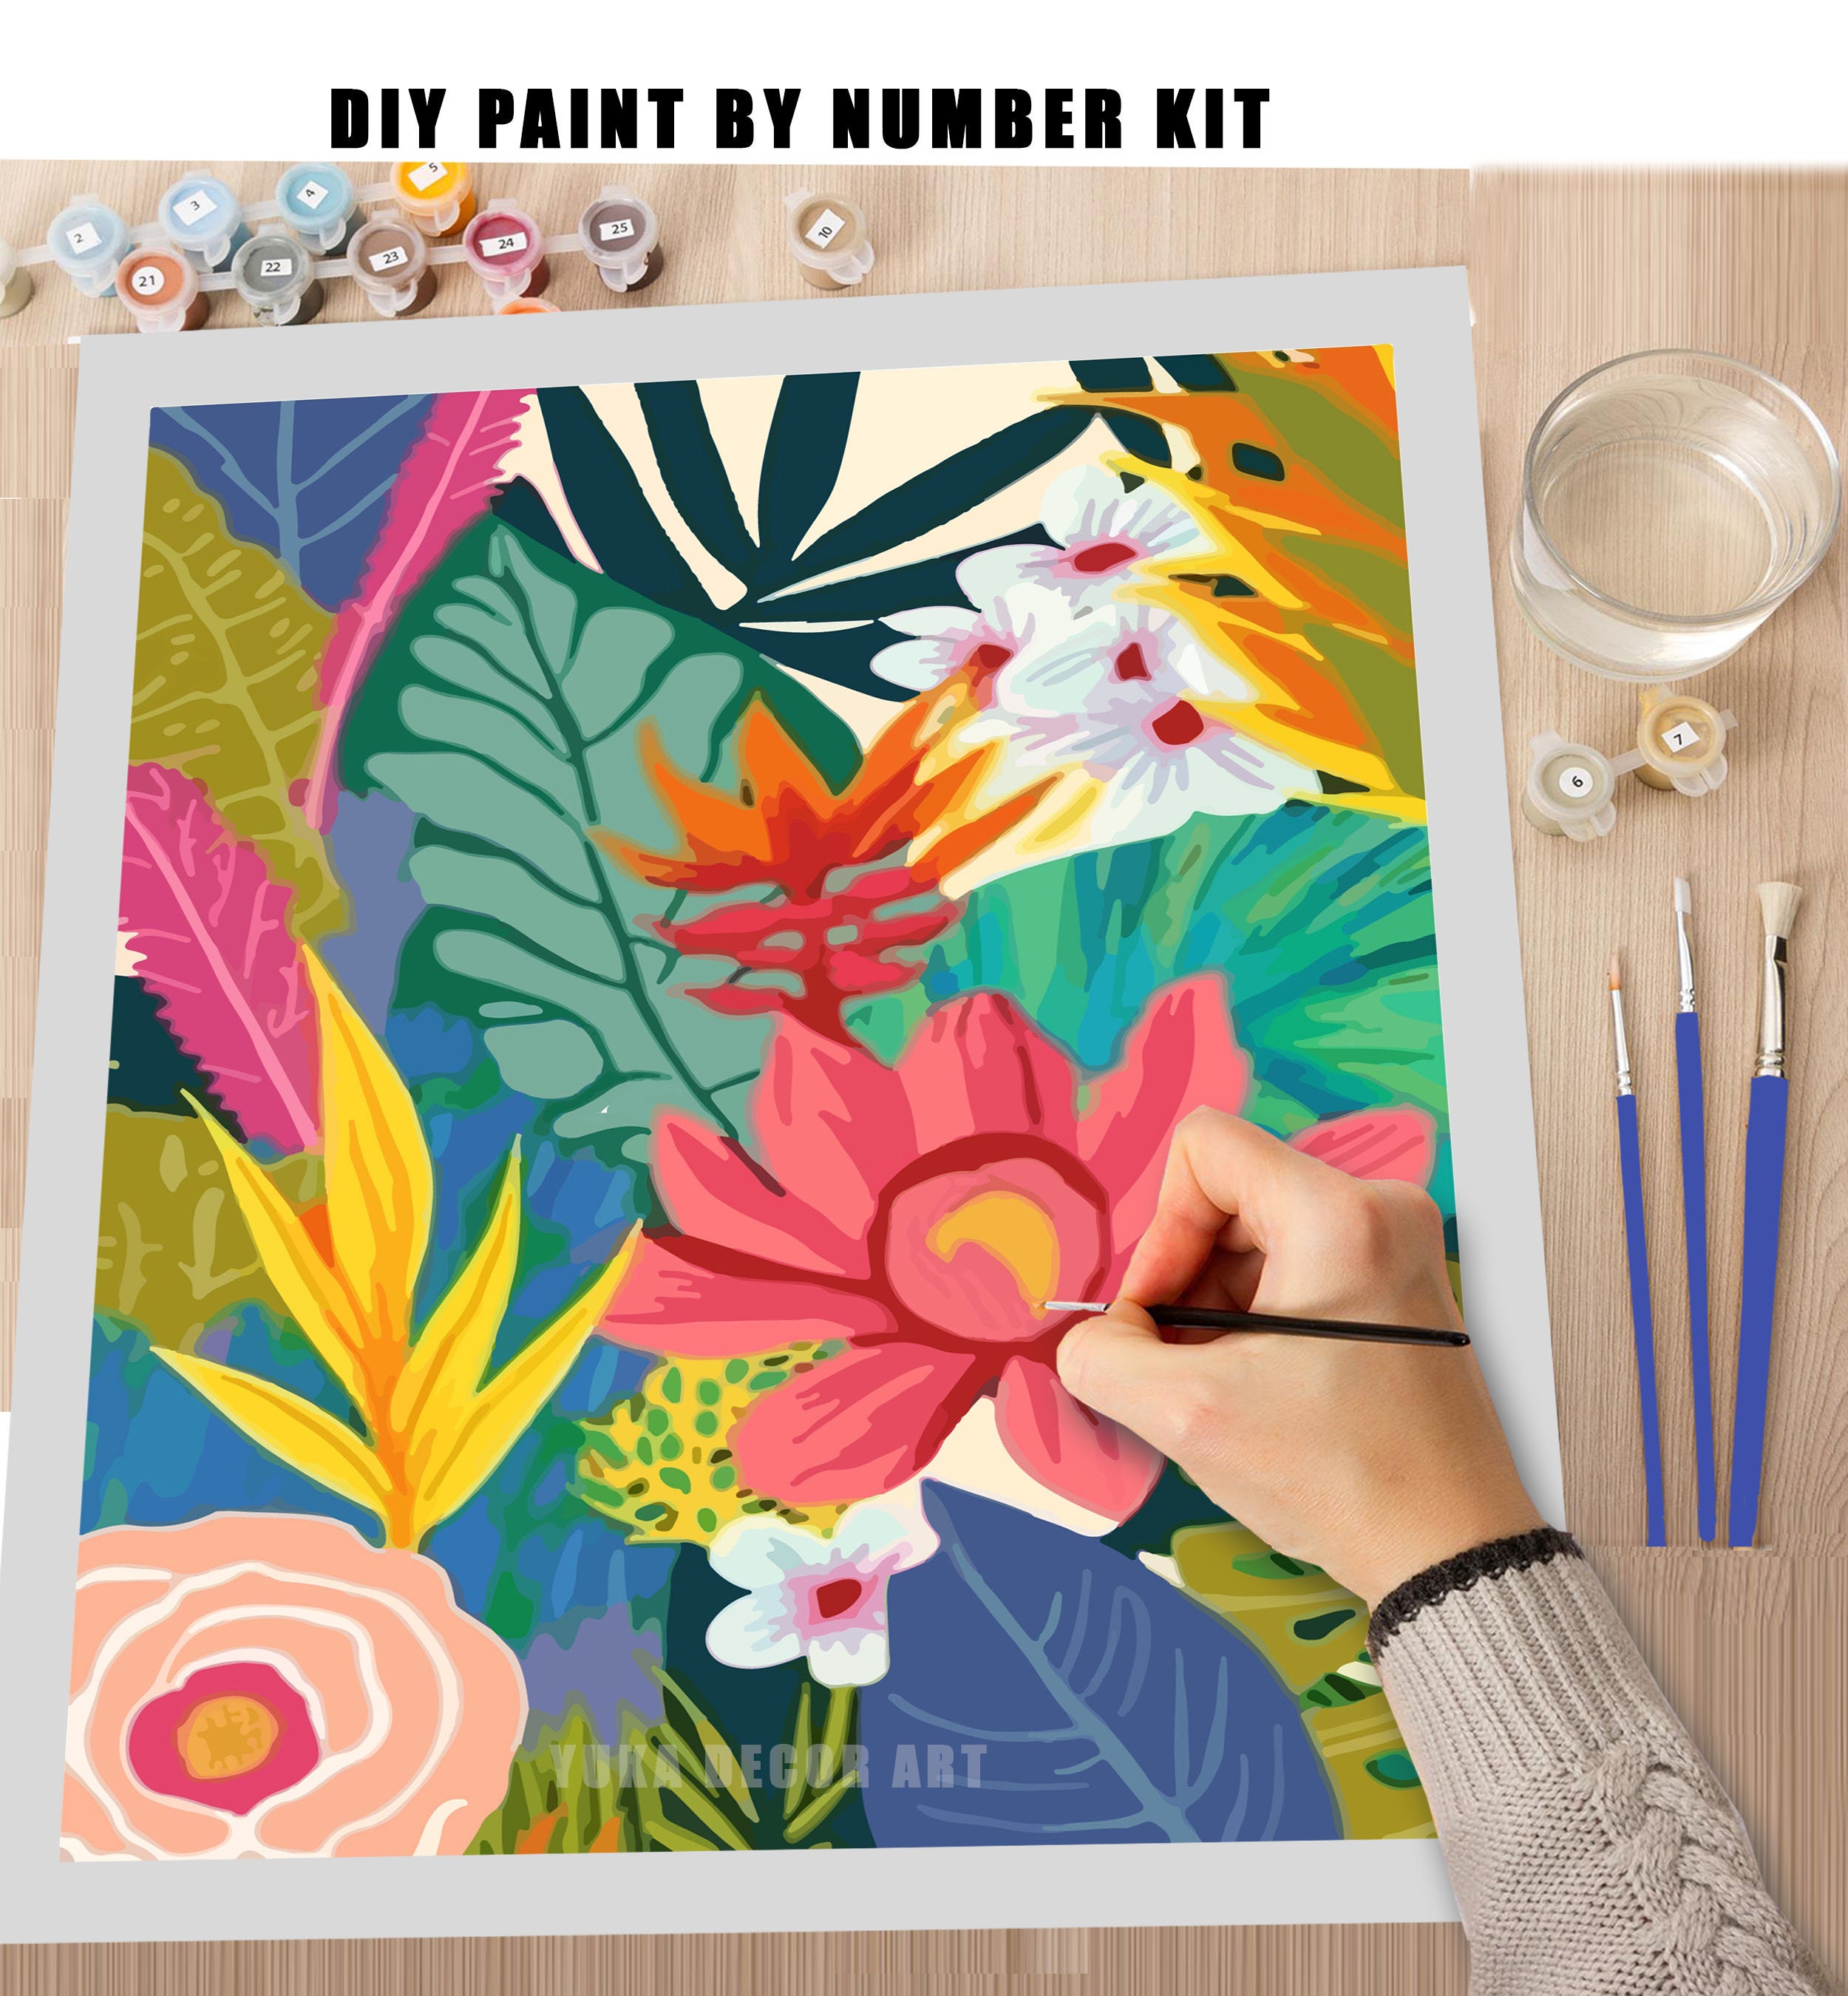 Paint by Number Kits For Adults [60% off + Free Shipping] – I Love DIY Art